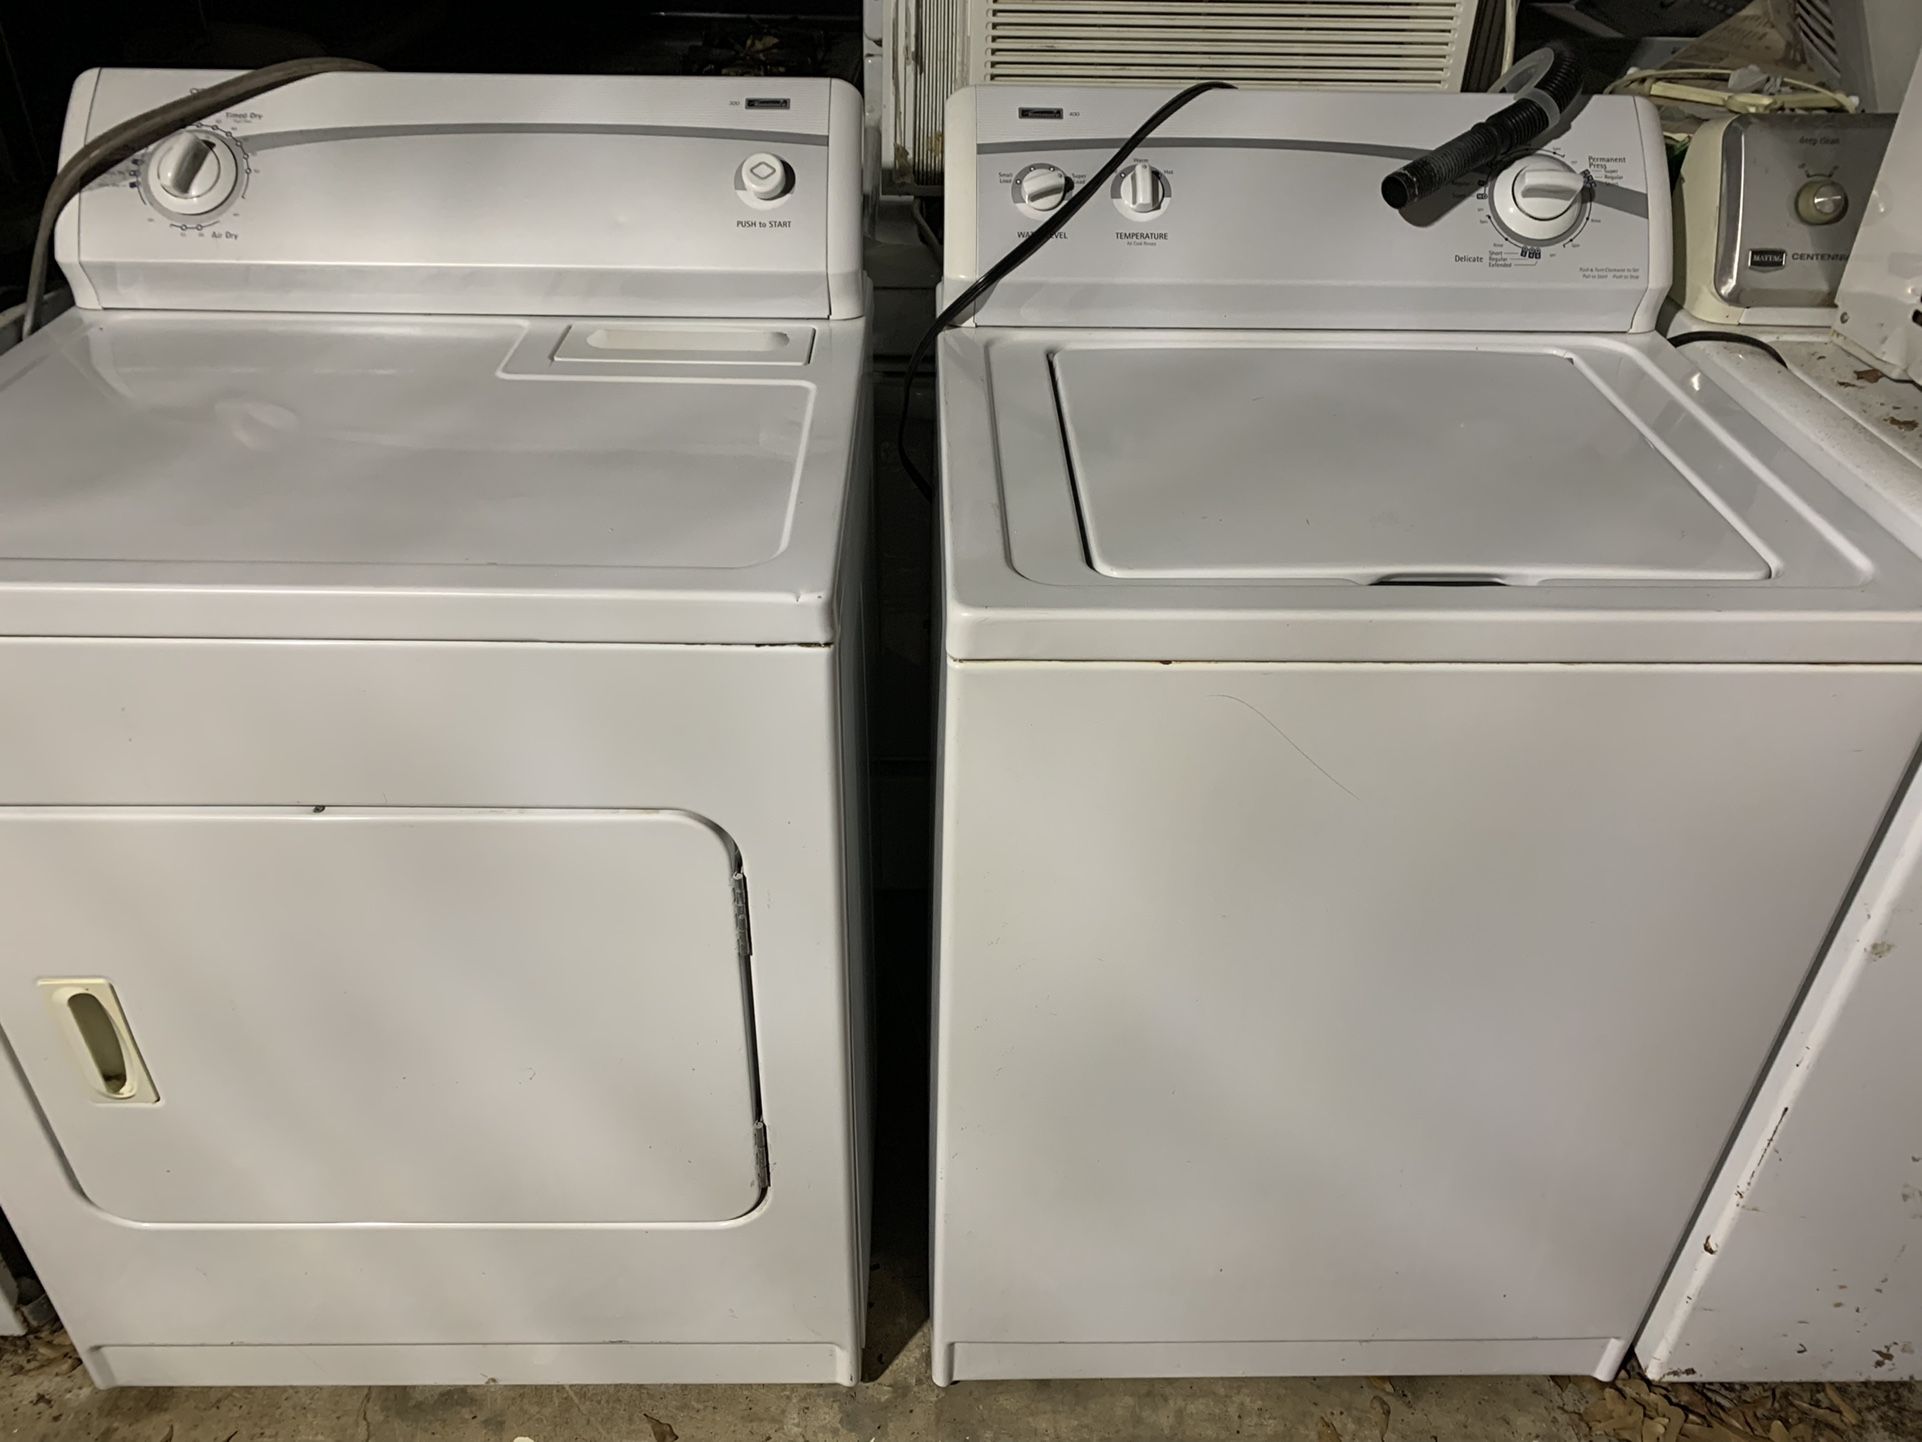 Matching Kenmore washer and dryer